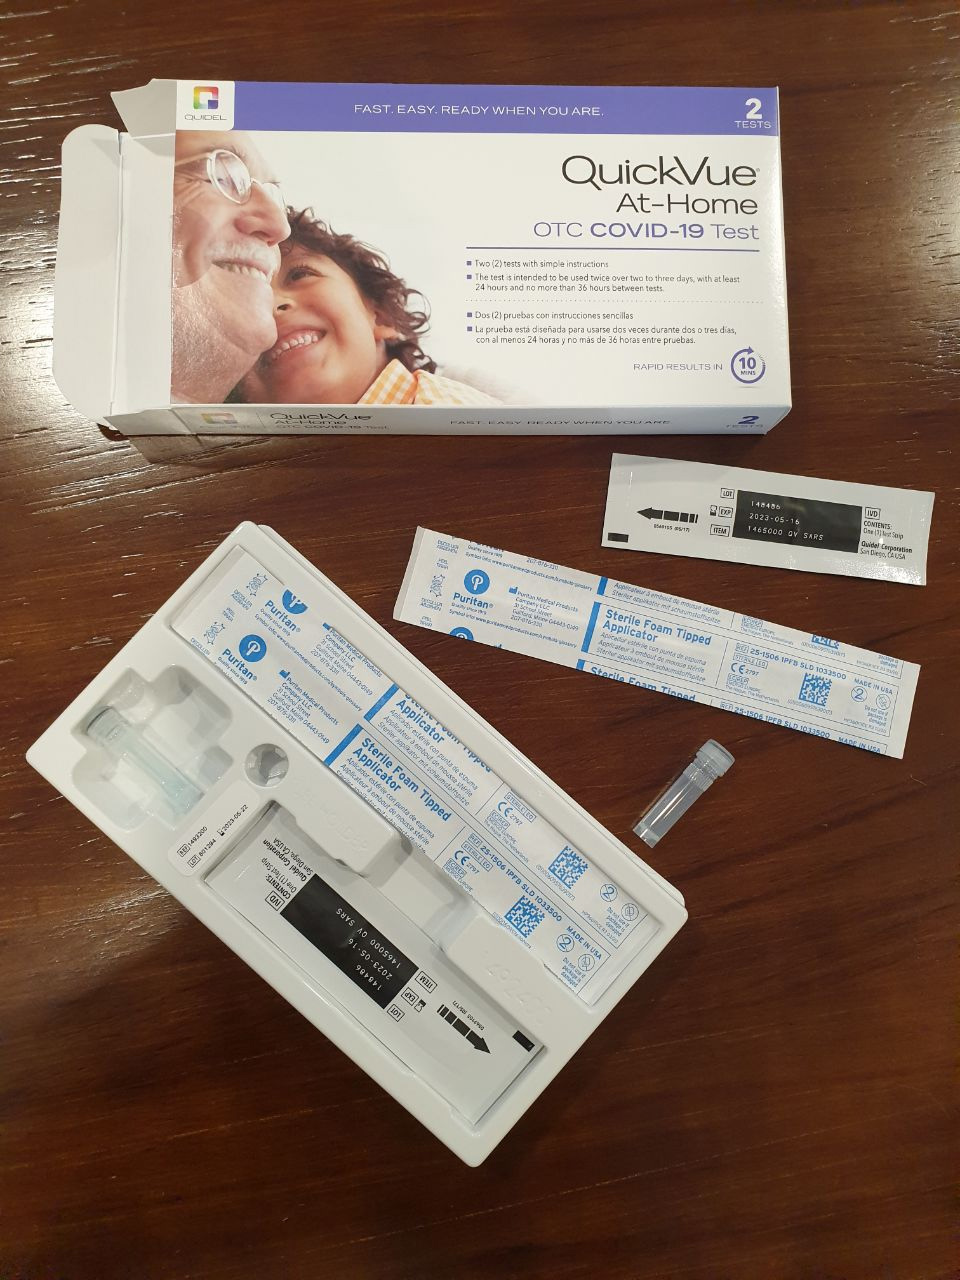 quickvue at home otc covid test kit